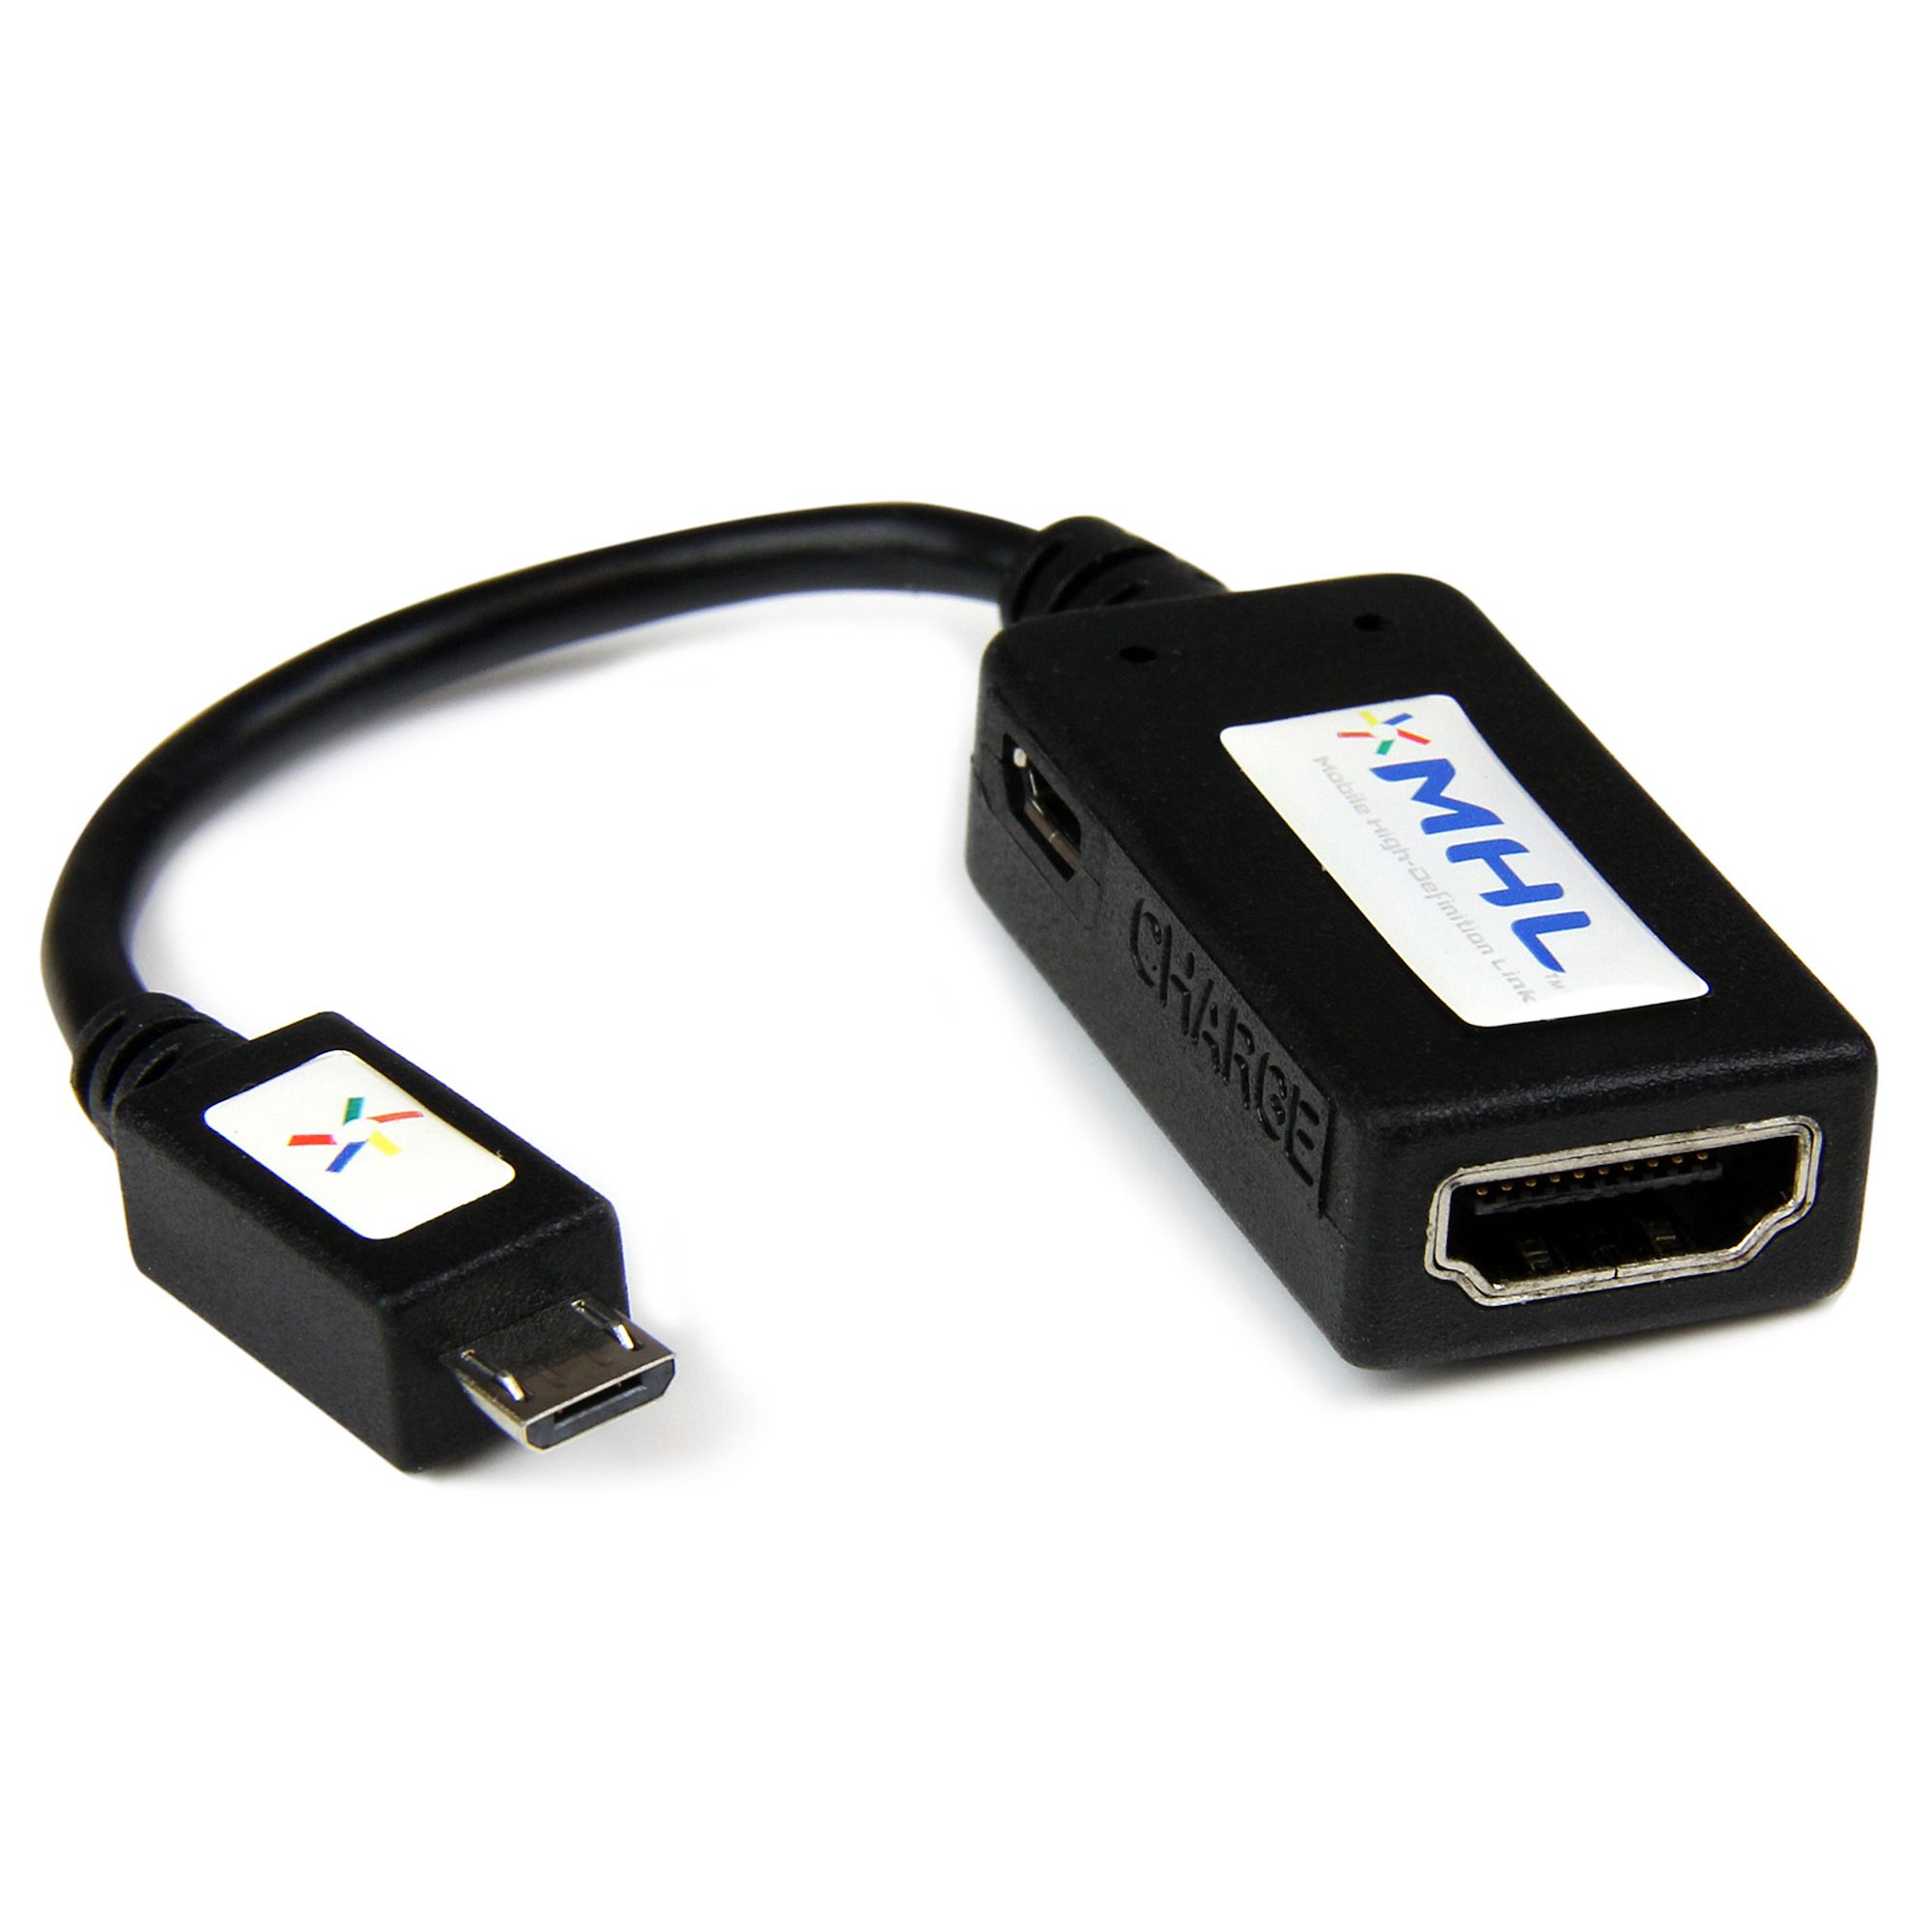 MHL Adapter Converter – Micro USB to HDMI